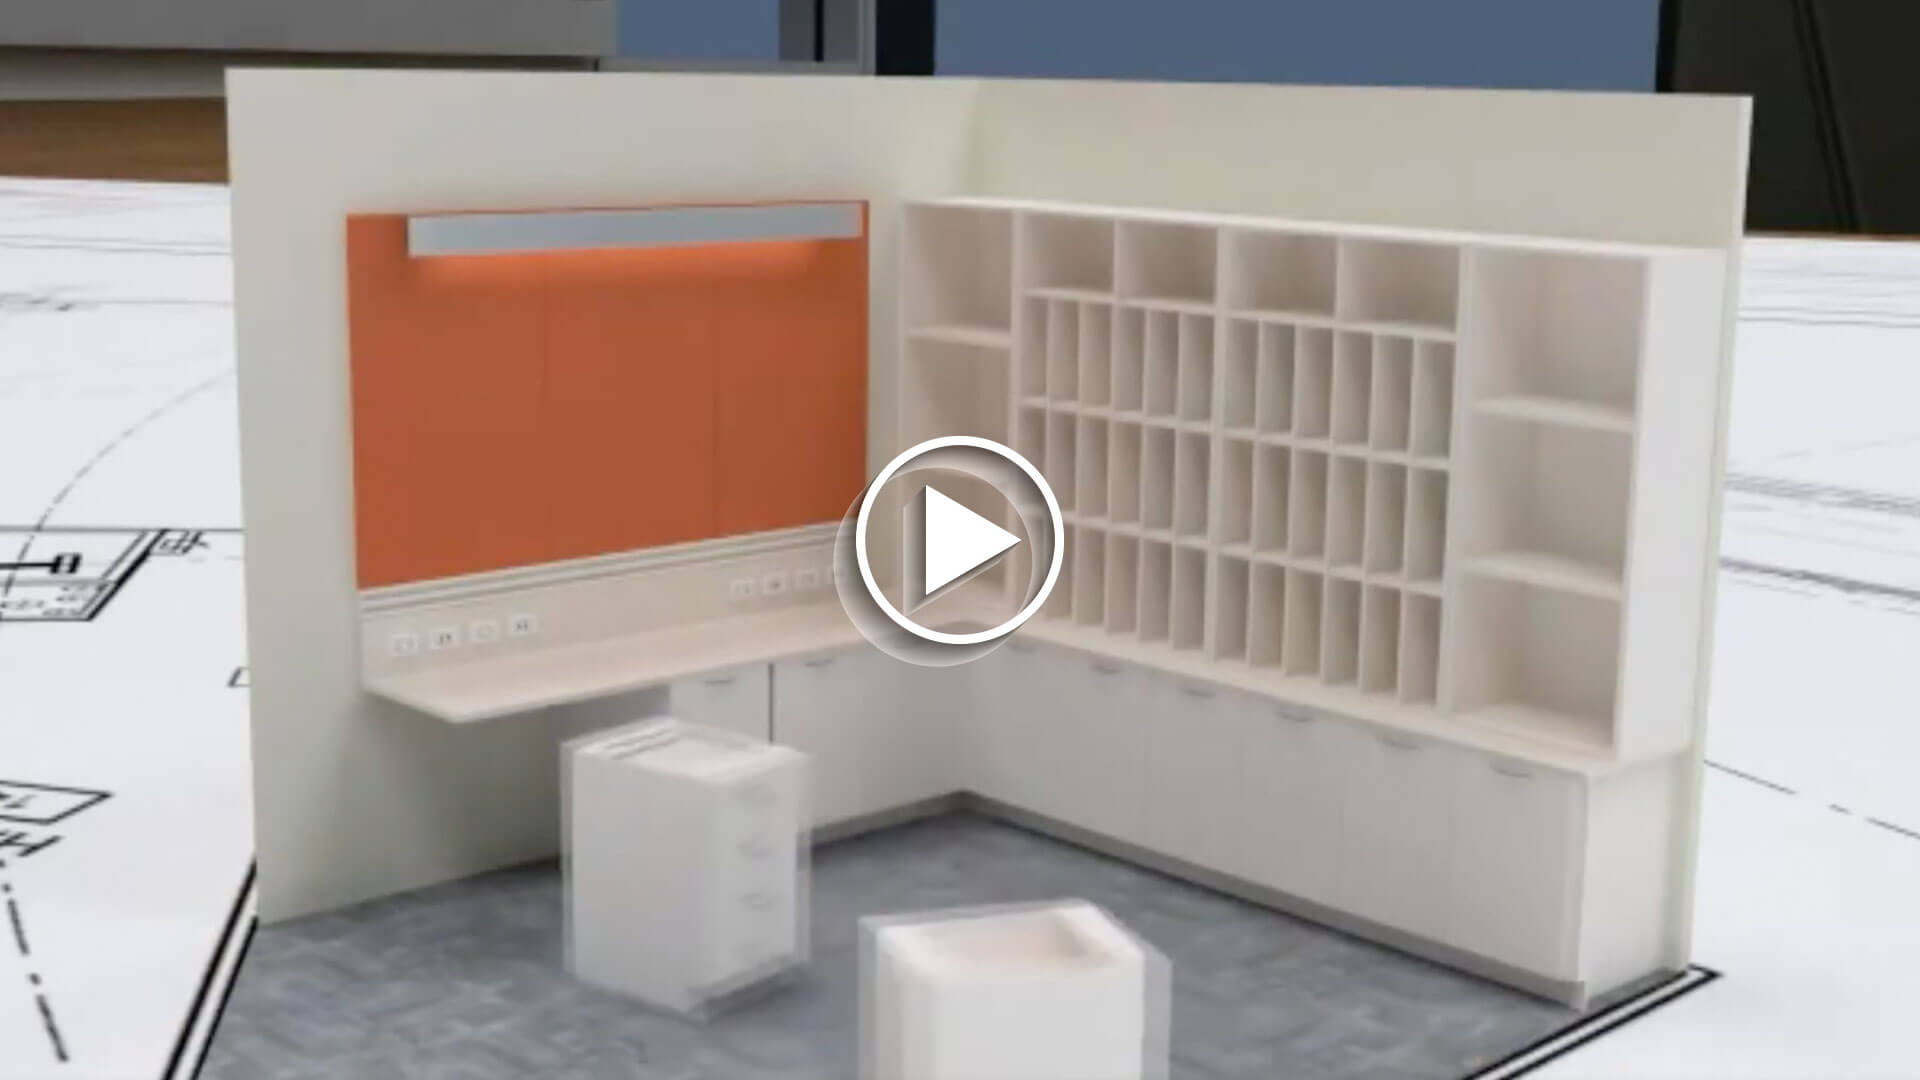 Modular casework cabinets reusable base upper cabinets environmentally friendly video poster